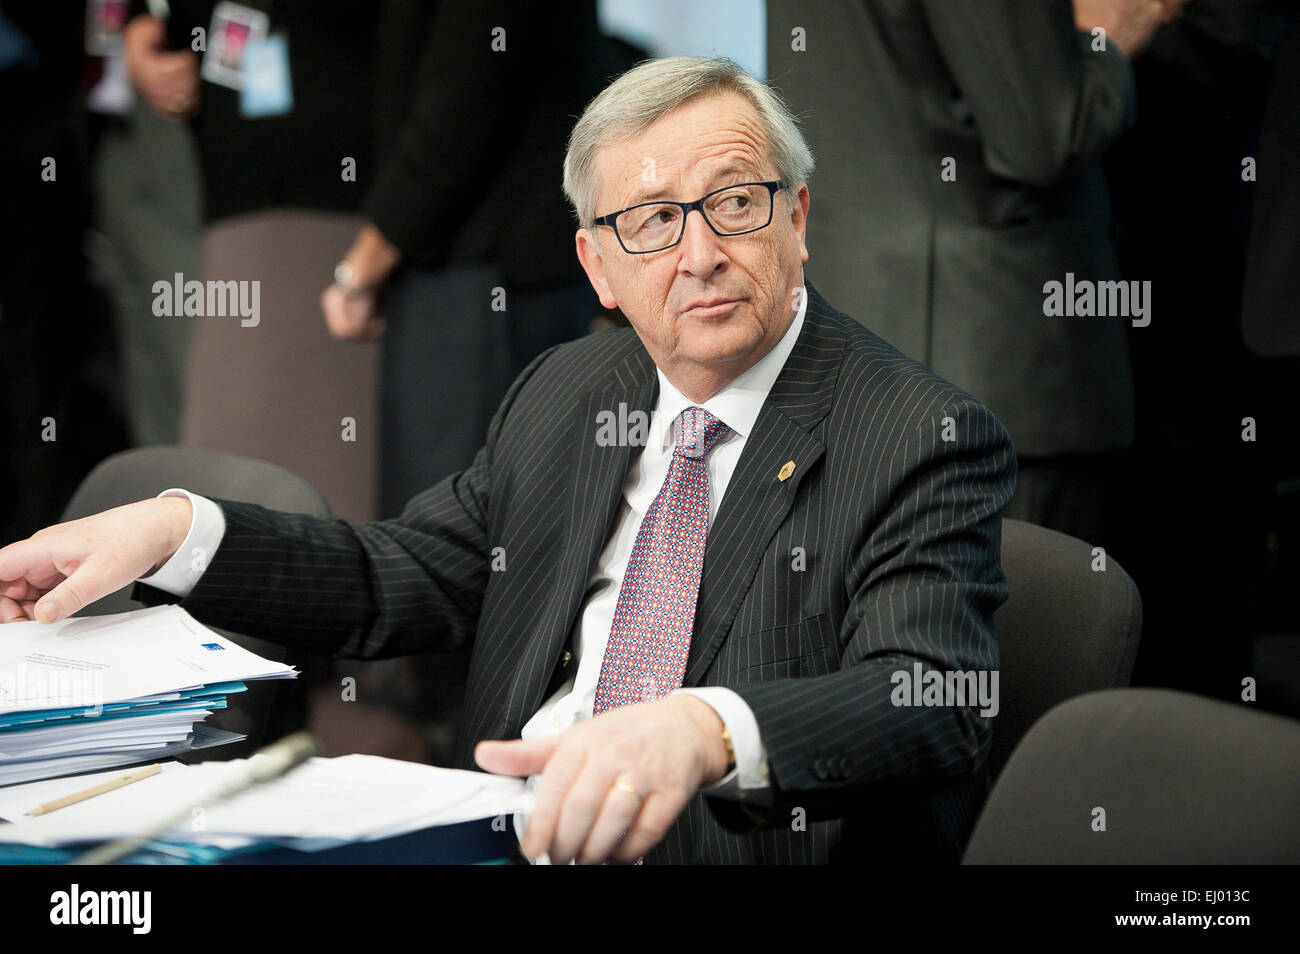 Brussels, Bxl, Belgium. 19th Mar, 2015. Jean-Claude Juncker, the president of the European Commission at the start of a Tripartite Social Summit ahead of the EU Summit in Brussels, Belgium on 19.03.2015. Credit:  ZUMA Press, Inc./Alamy Live News Stock Photo